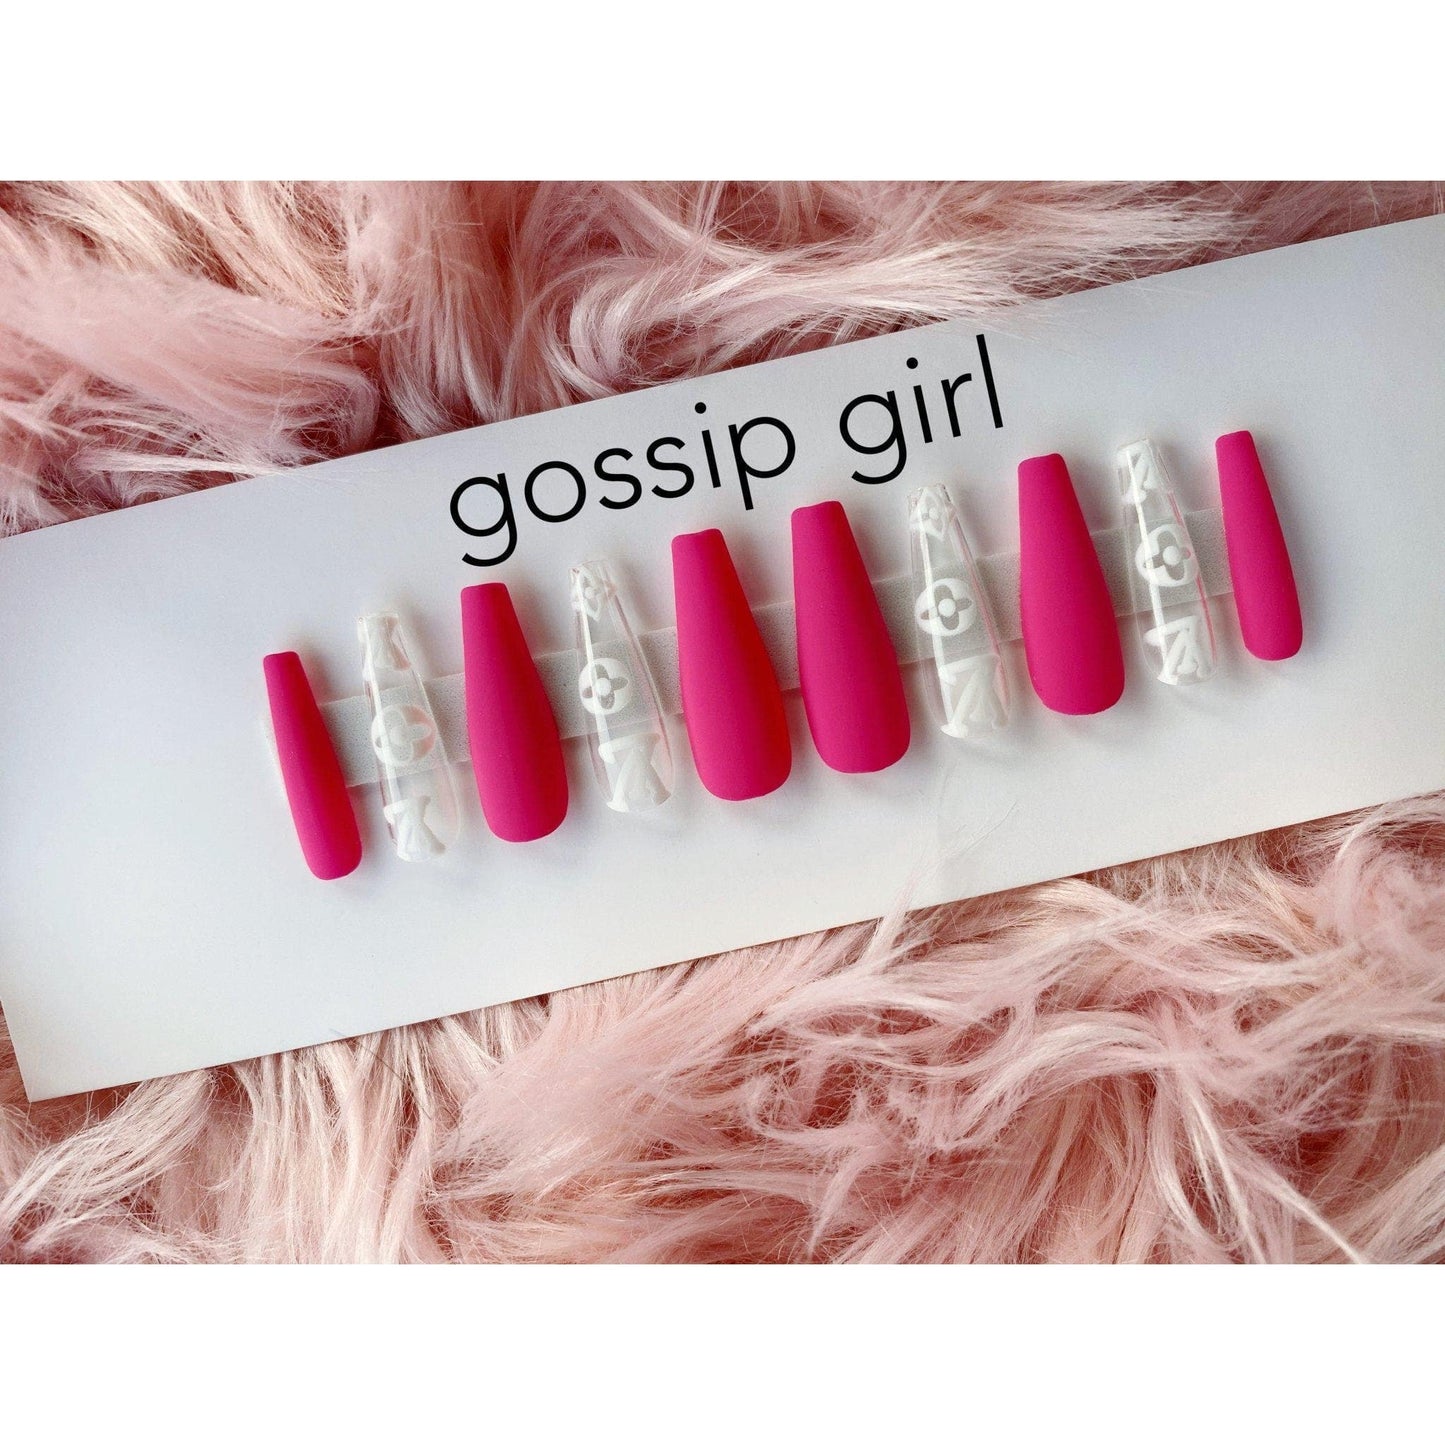 GOSSIP GIRL - LUXE NAILS - FEMME by Alonna Elaine